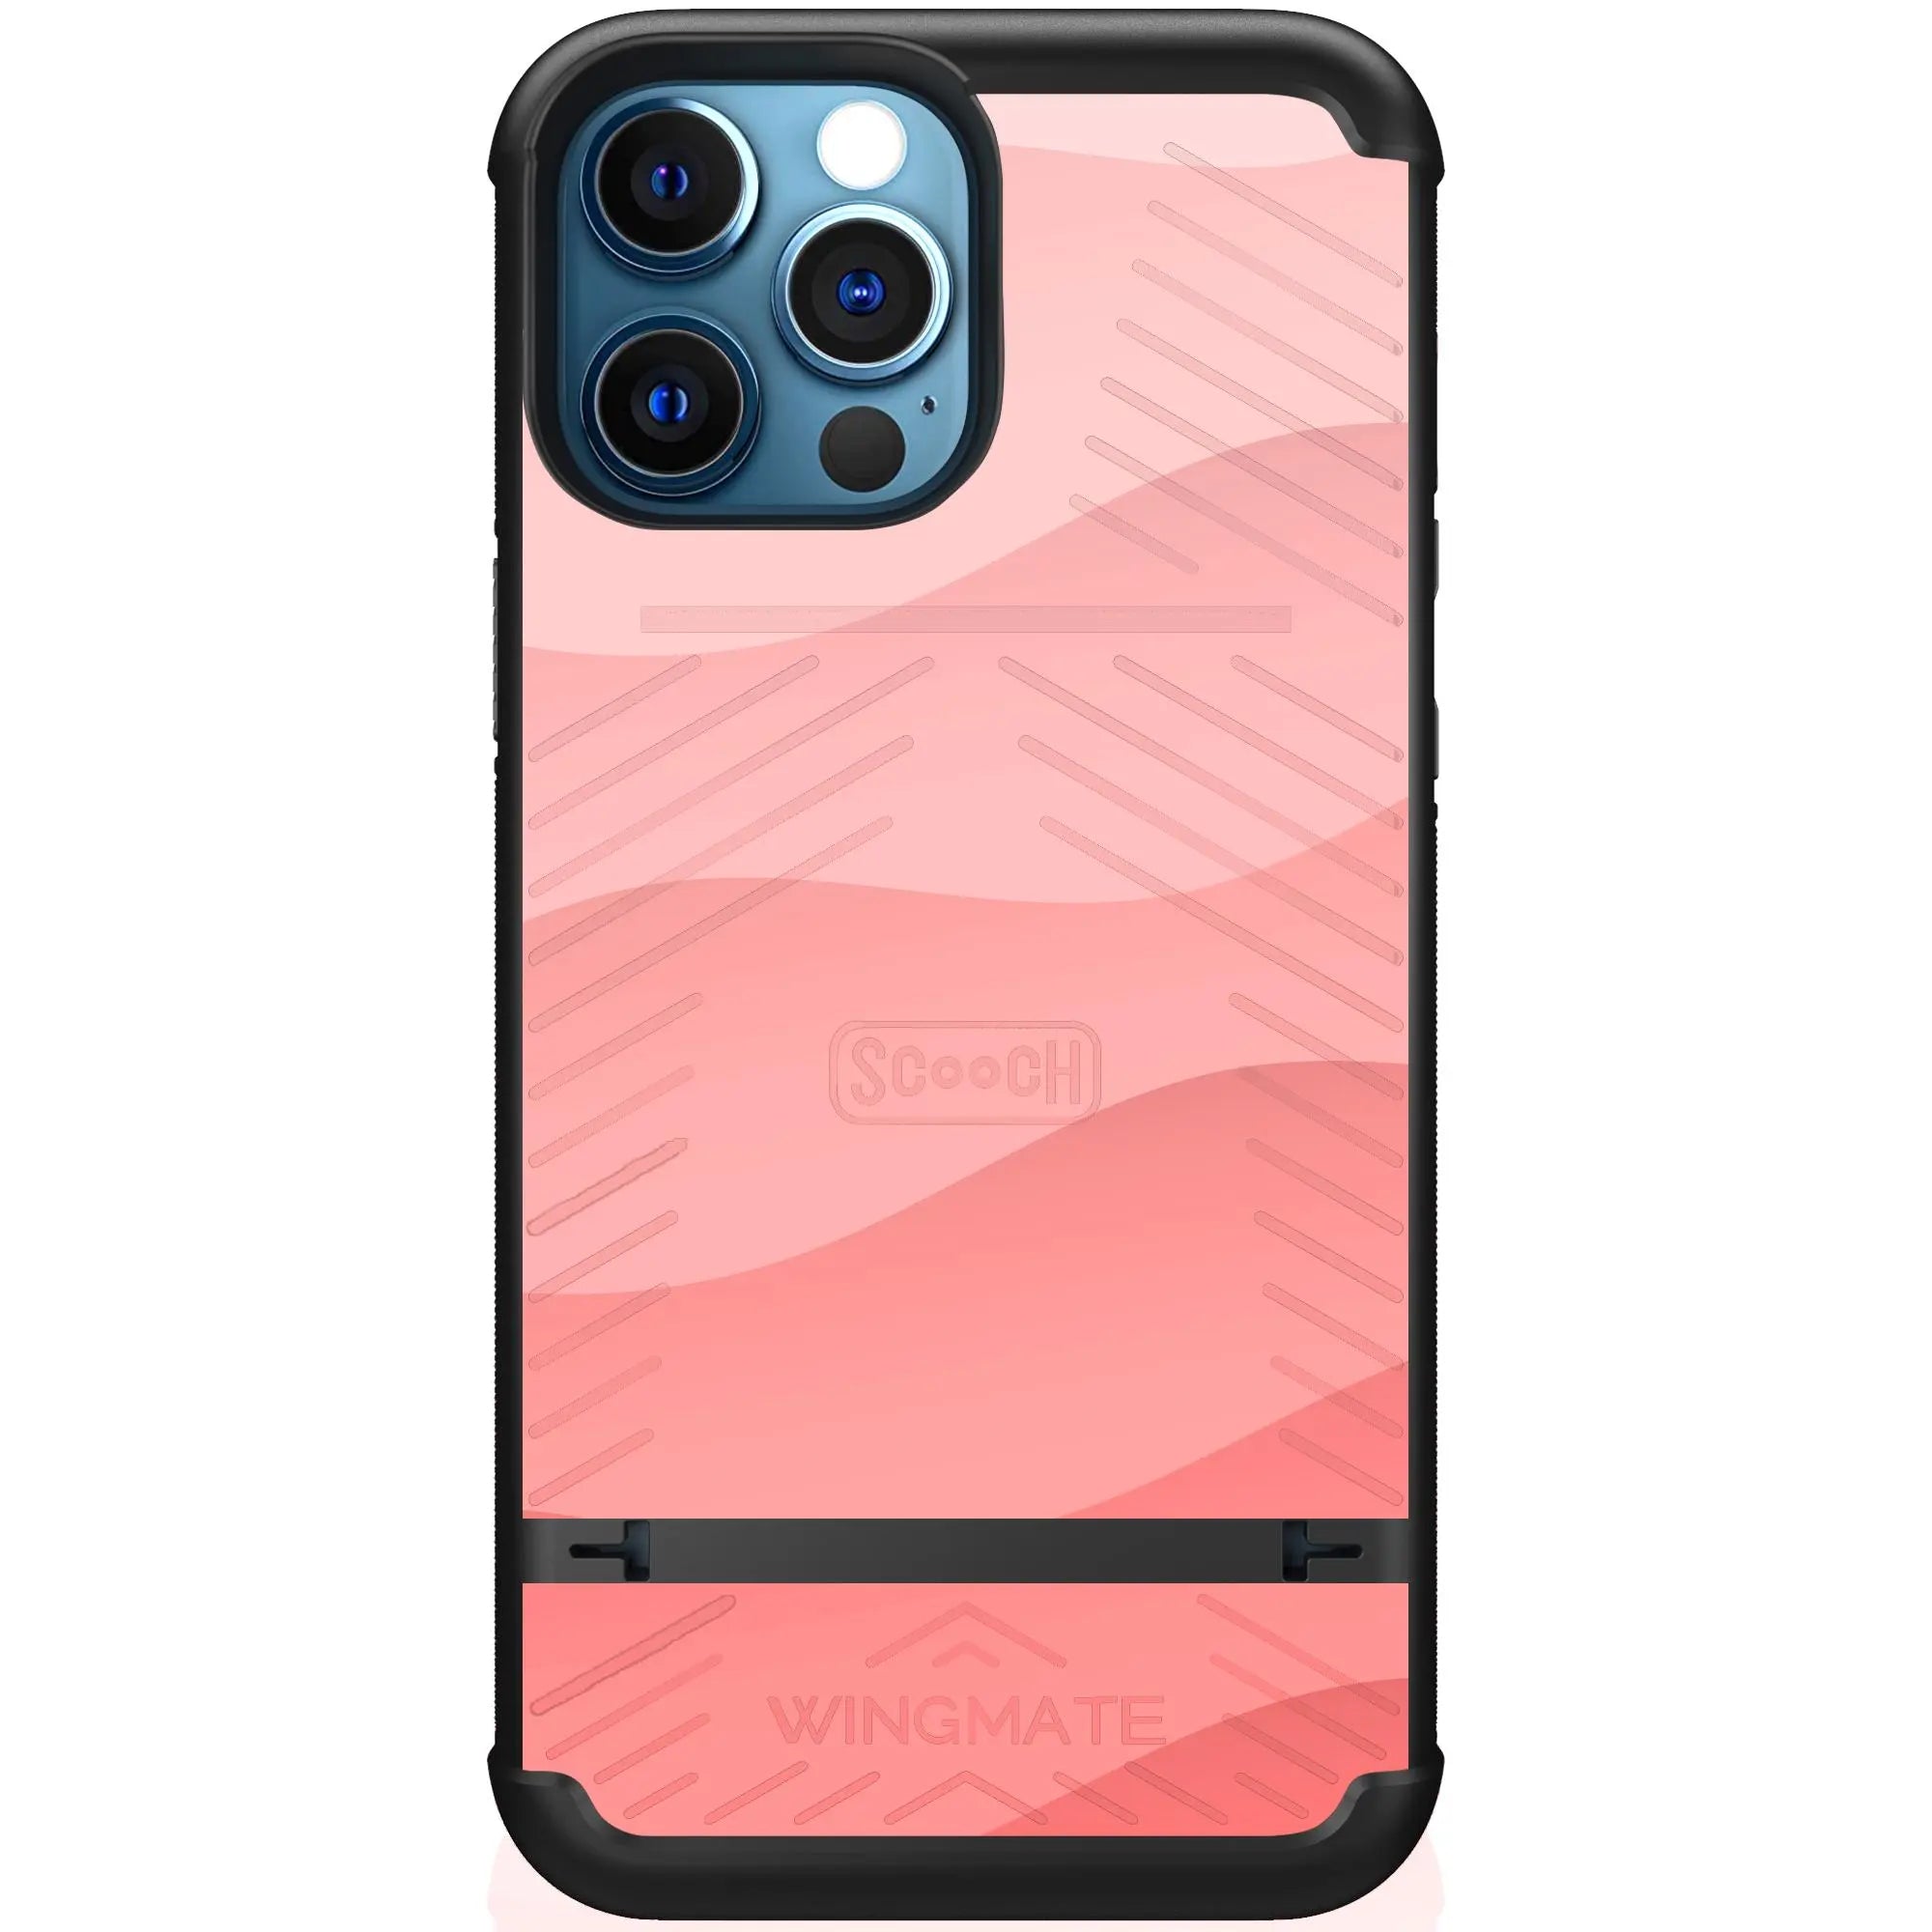 Scooch-Wingmate for iPhone 12 Pro Max-Pink-Waves